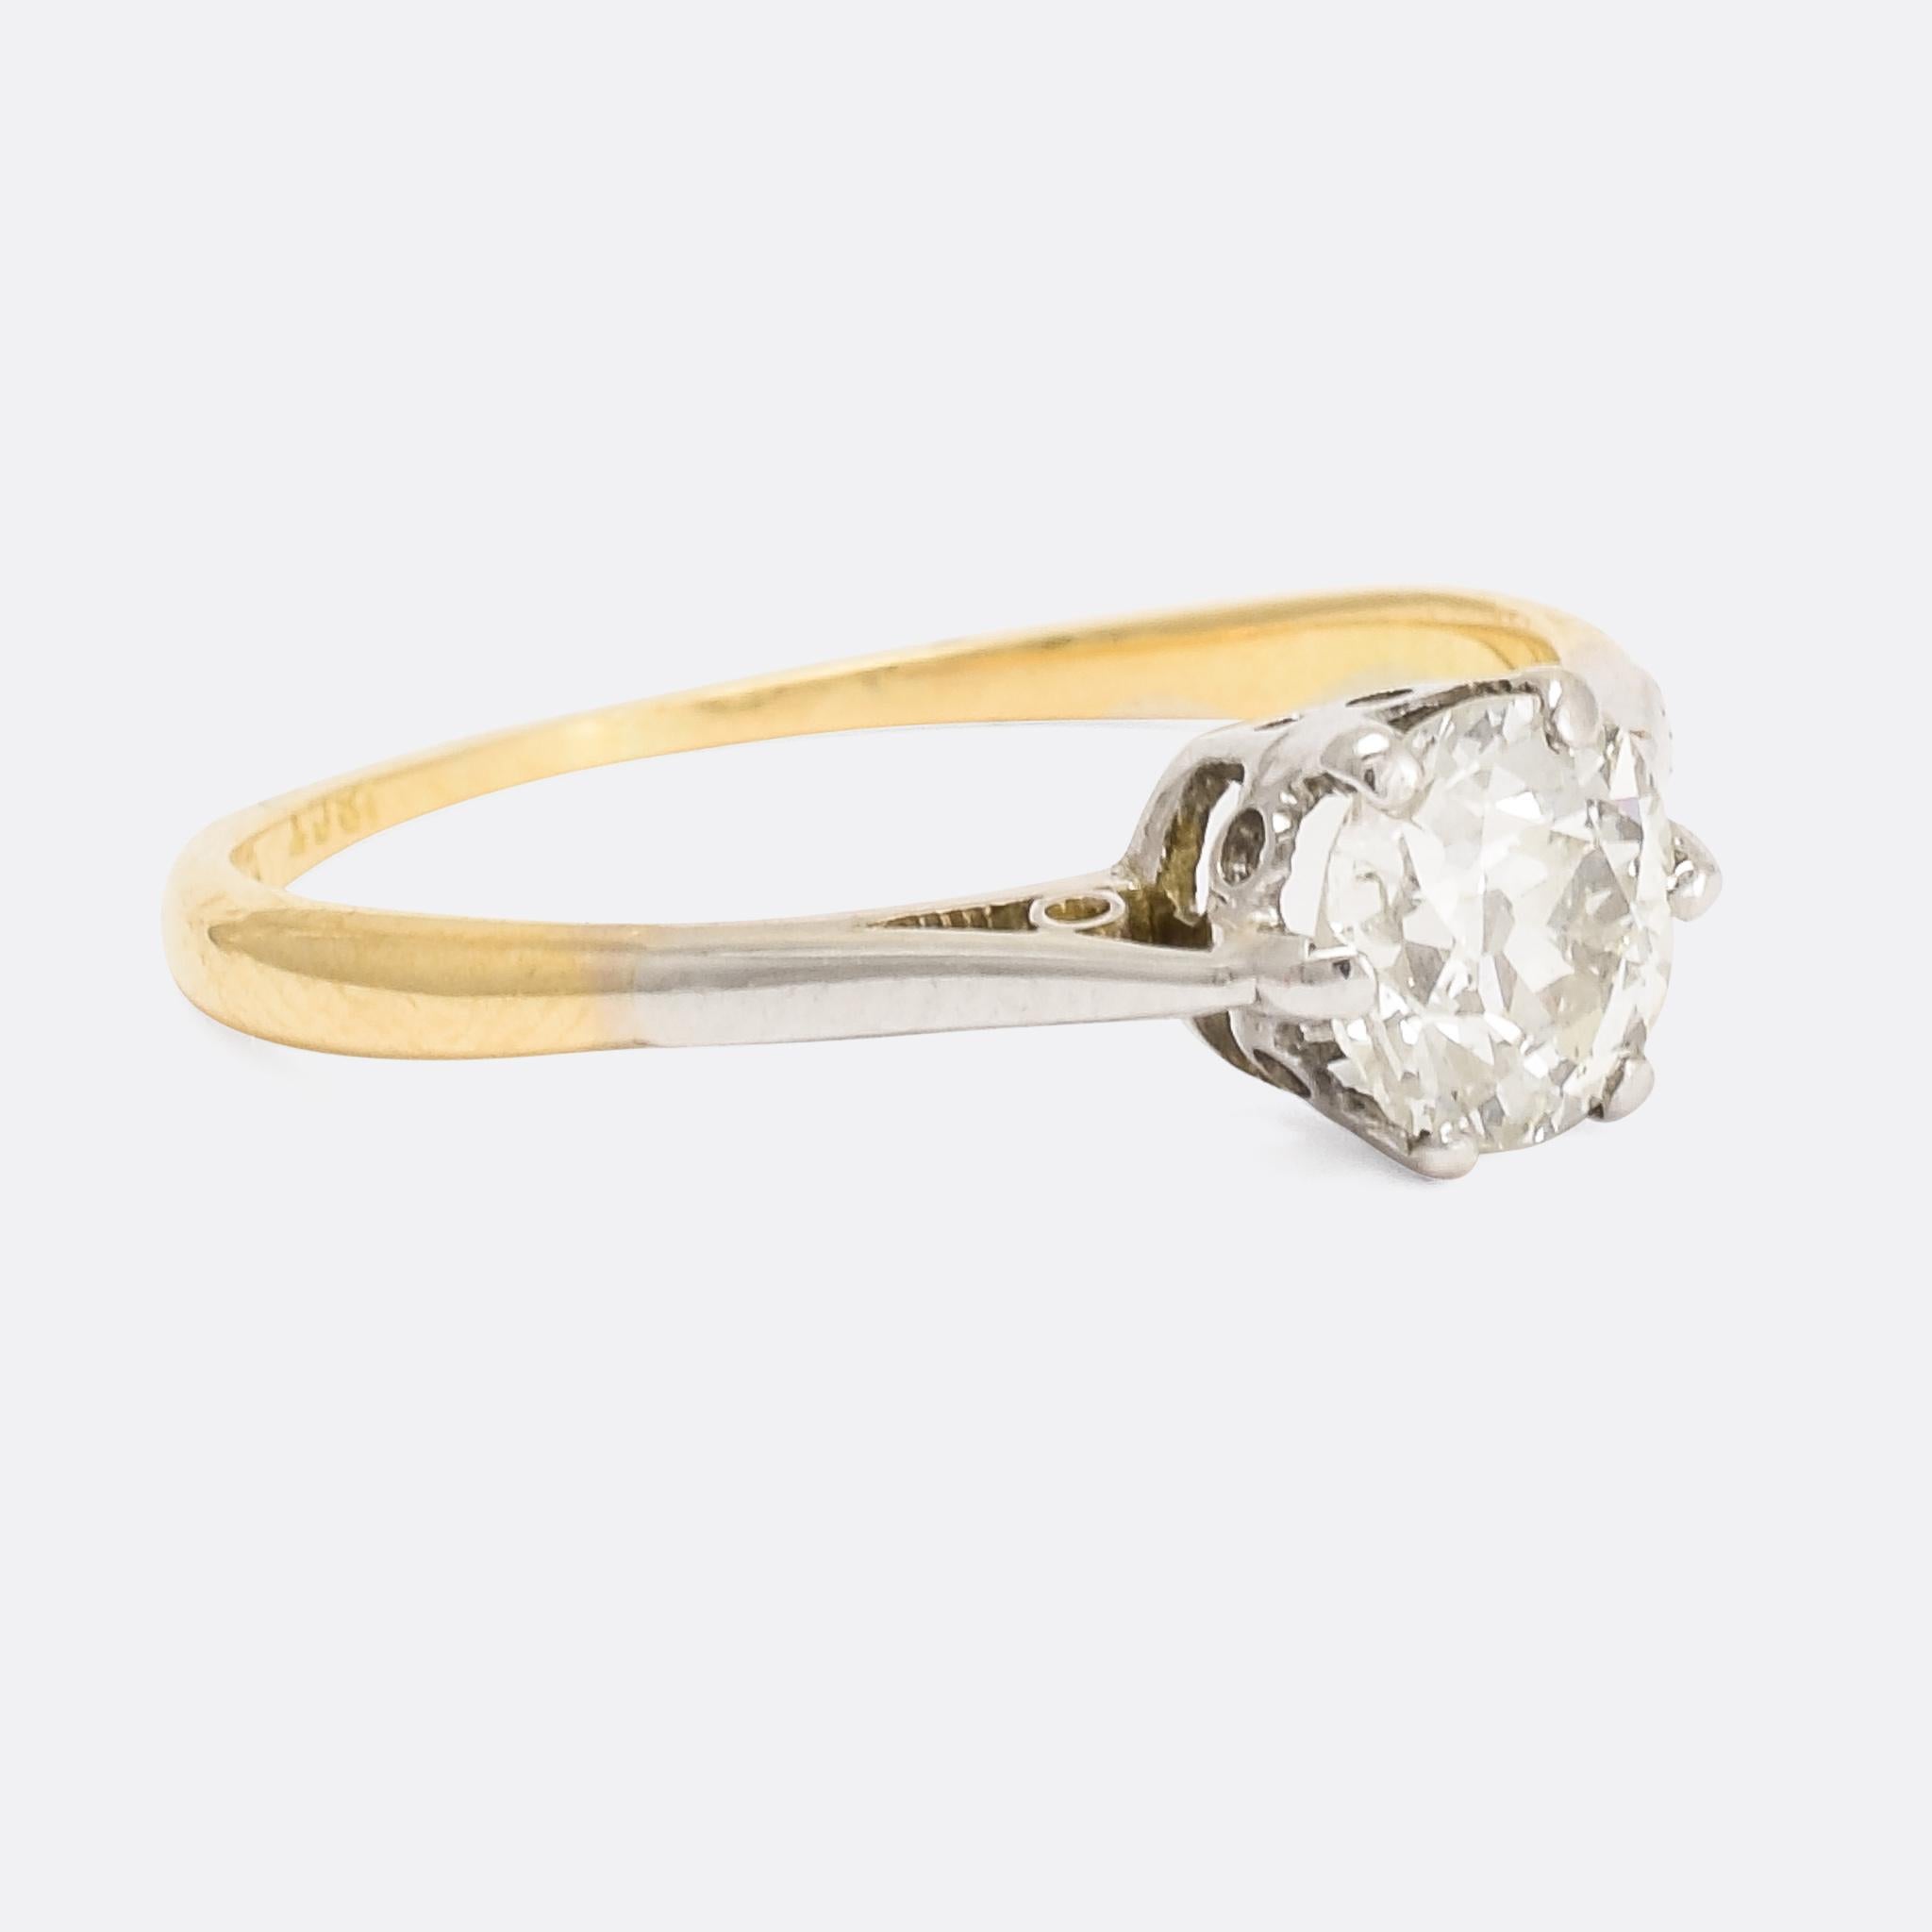 The perfect antique solitaire ring set with a superb 3/4 carat old cushion cut diamond. The ring features a classic six-claw mount in platinum, with an 18k yellow gold band; further platinum accents down the shoulders produce a pleasing two-tone